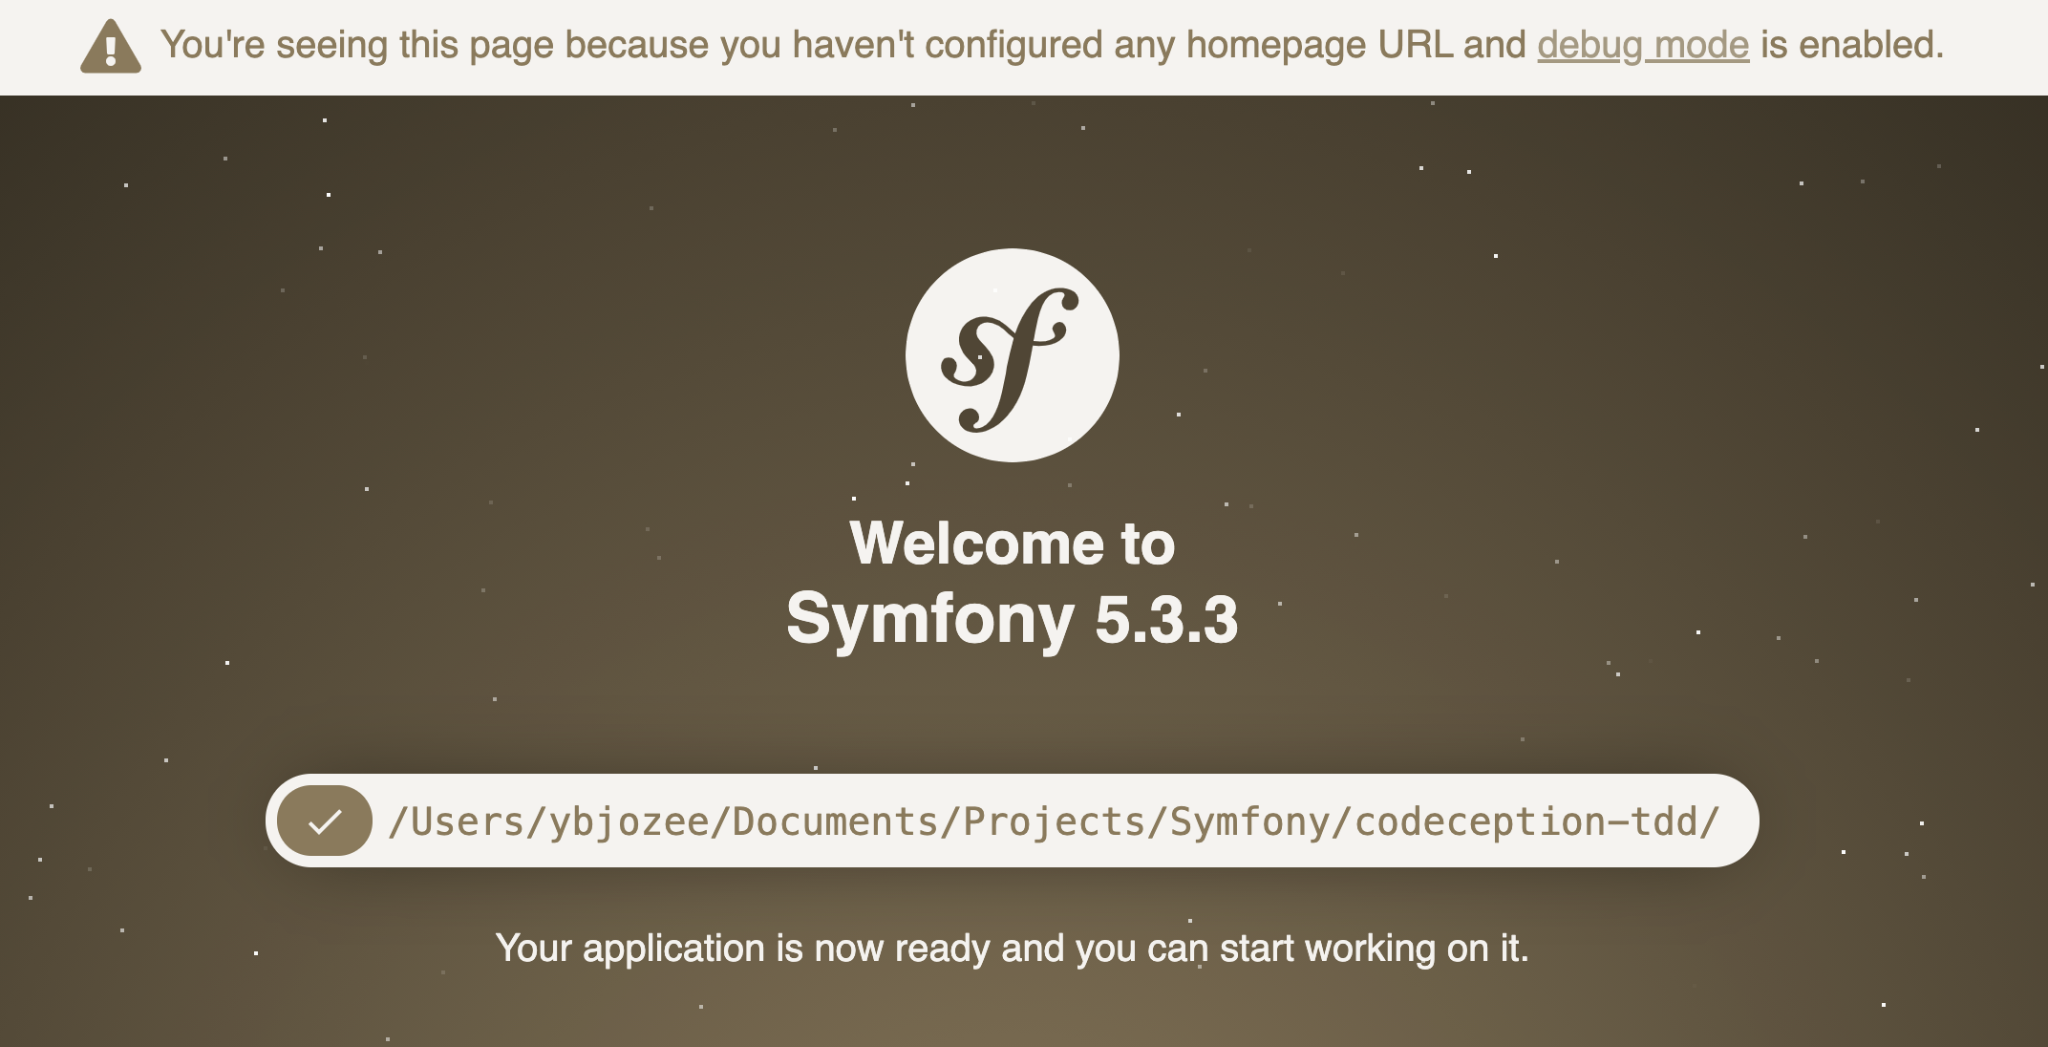 The default Symfony home page